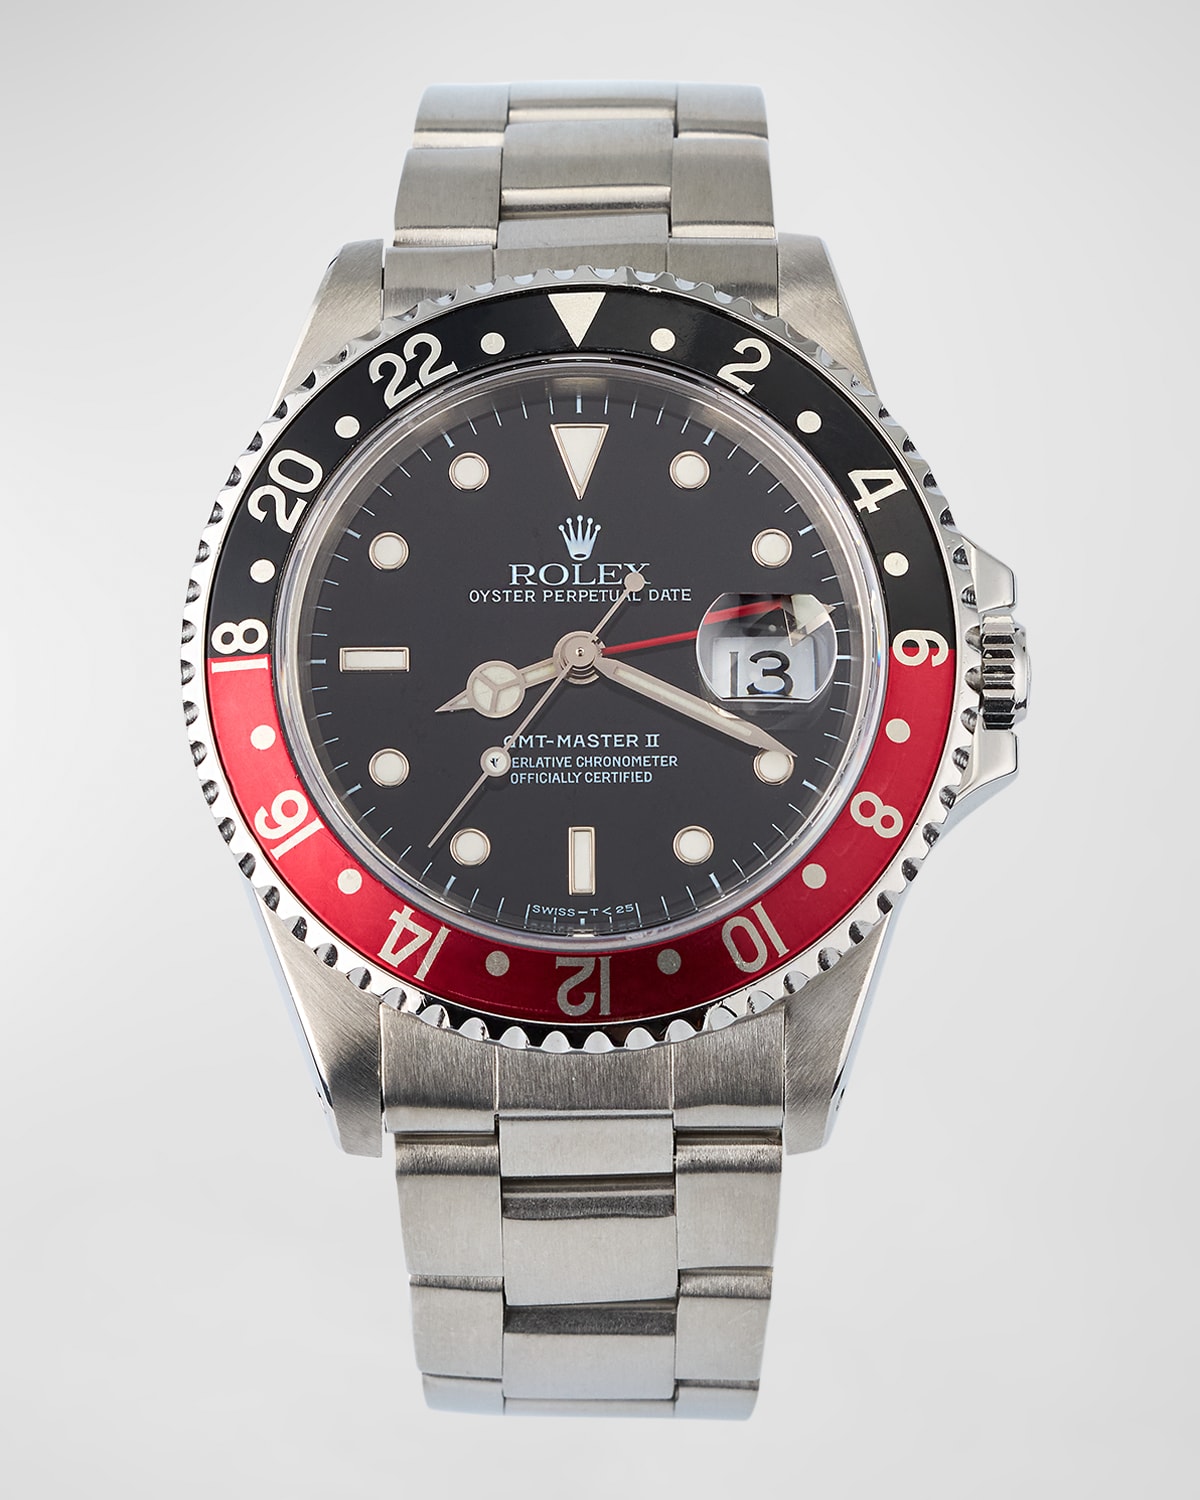 Rolex Oyster Perpetual GMT-Master II 40mm Vintage 1997 Watch